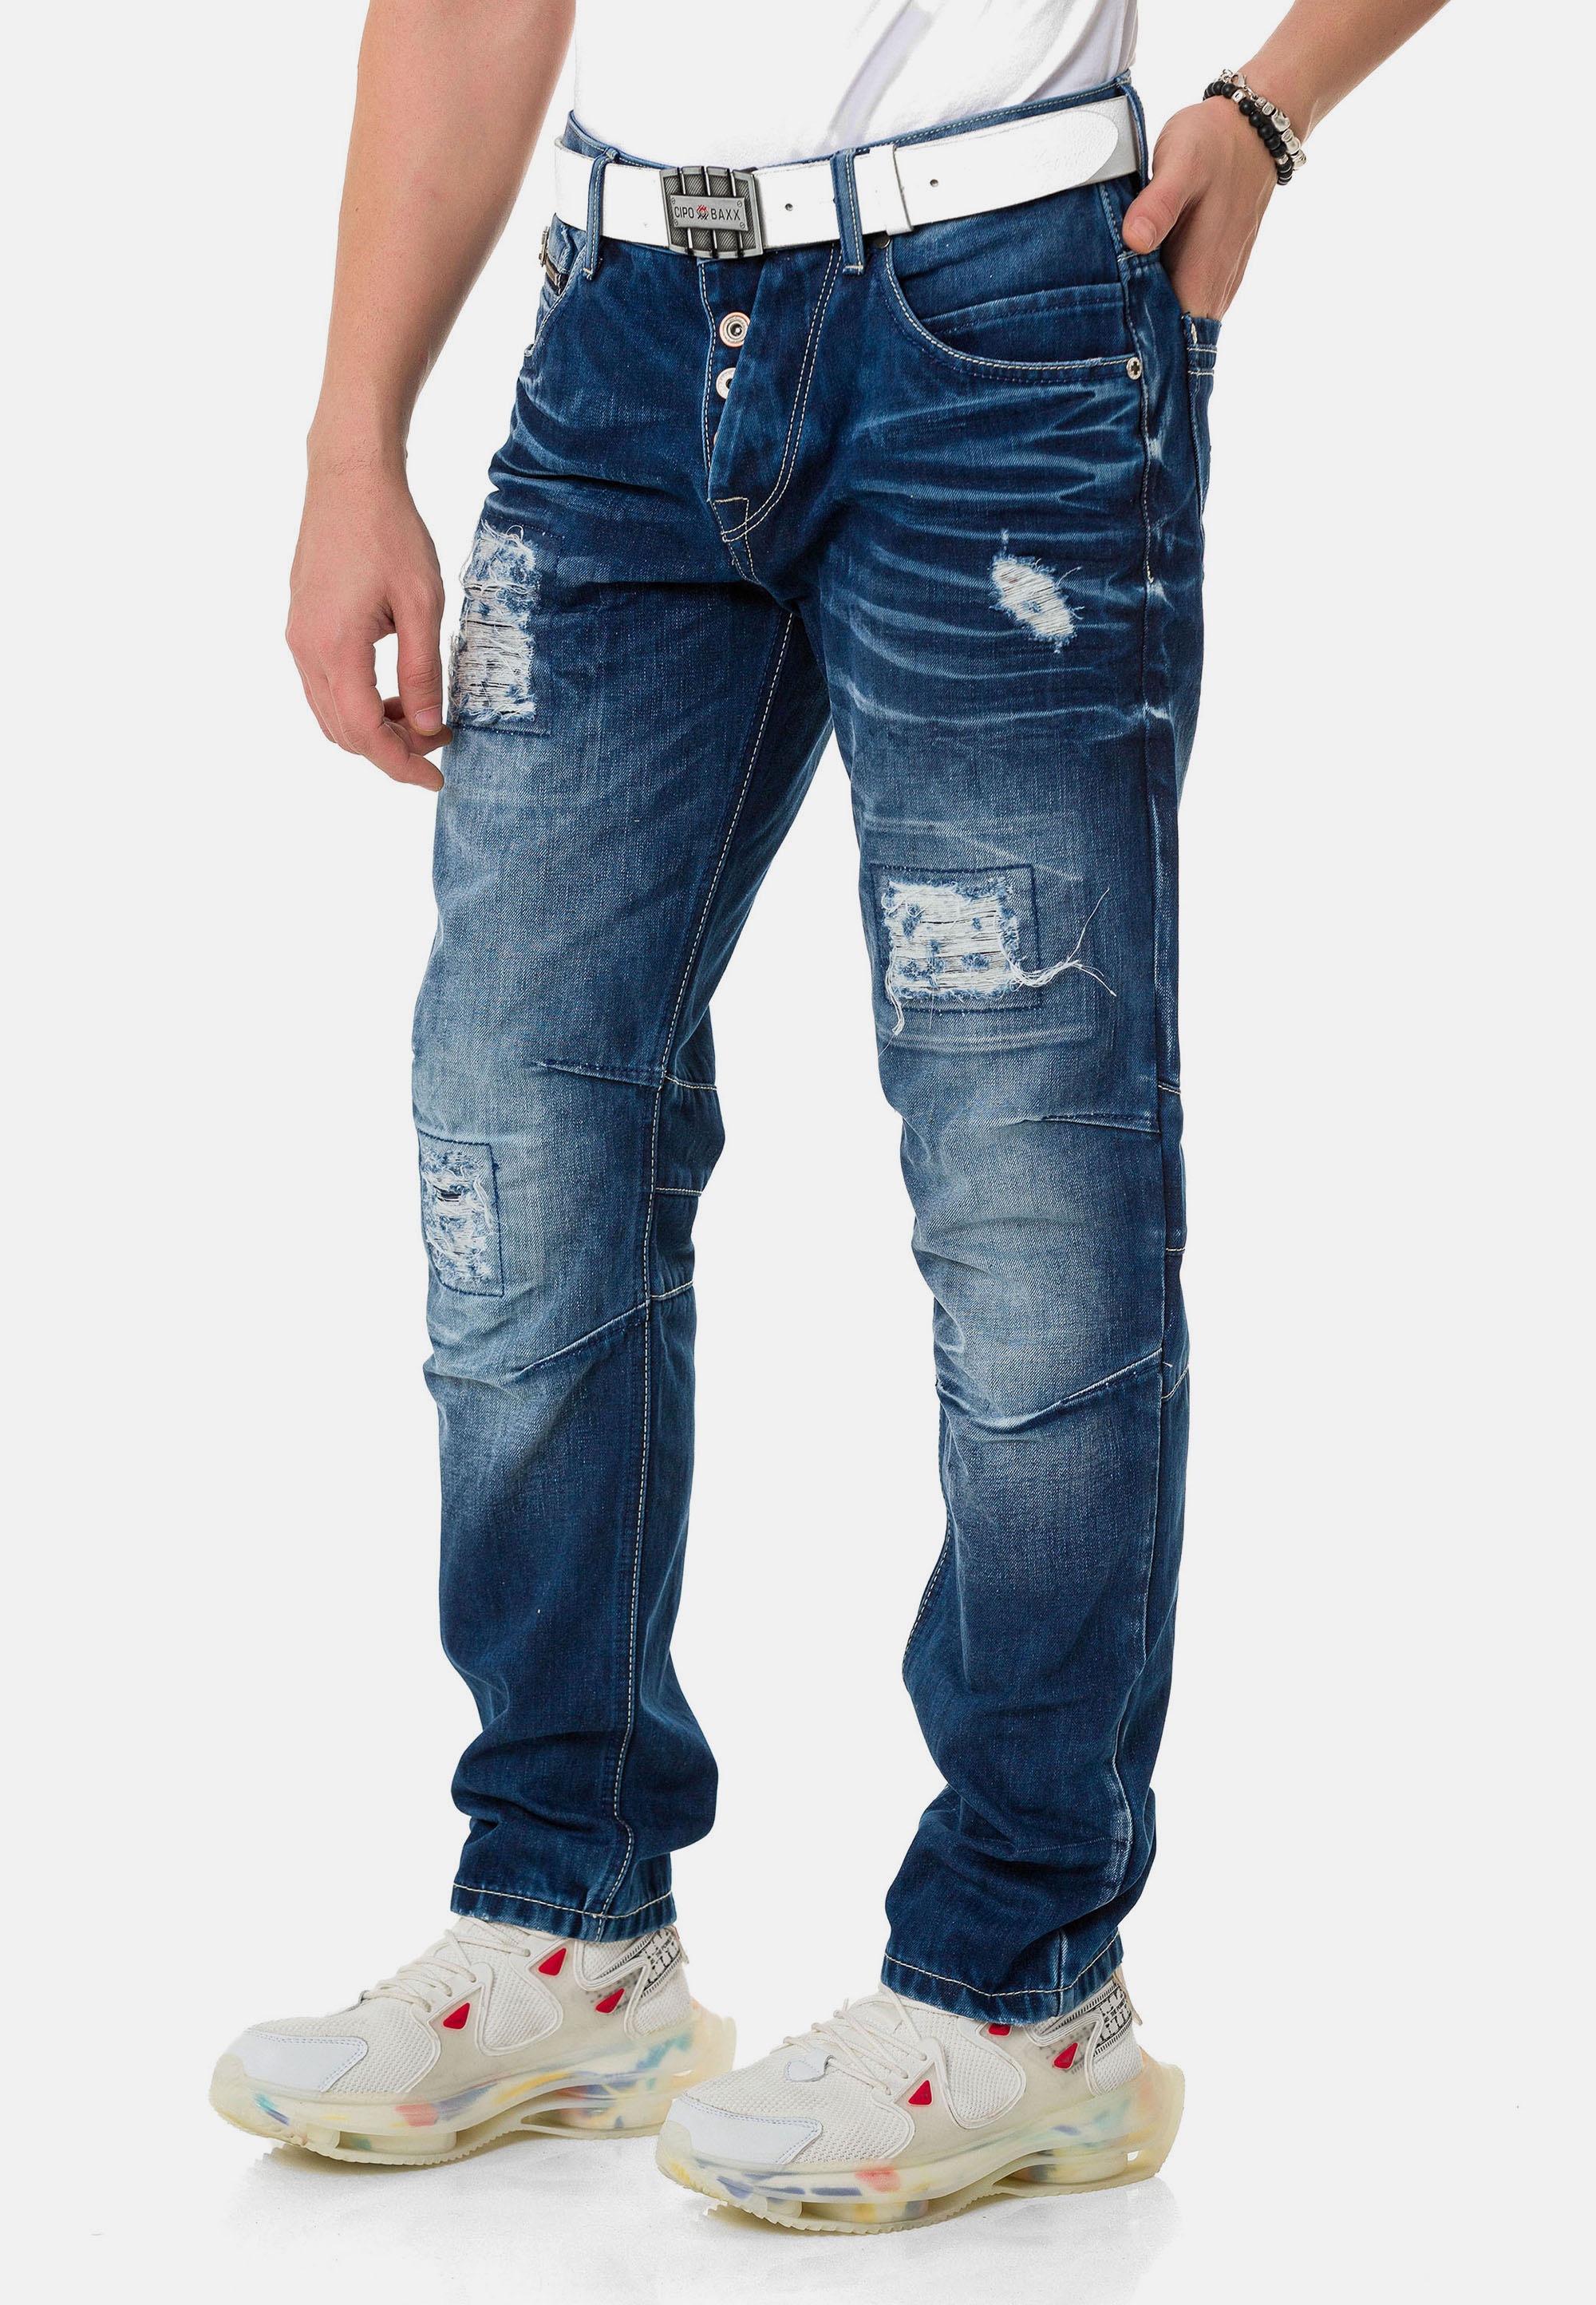 Cipo & Baxx Bequeme Jeans, in coolem Look